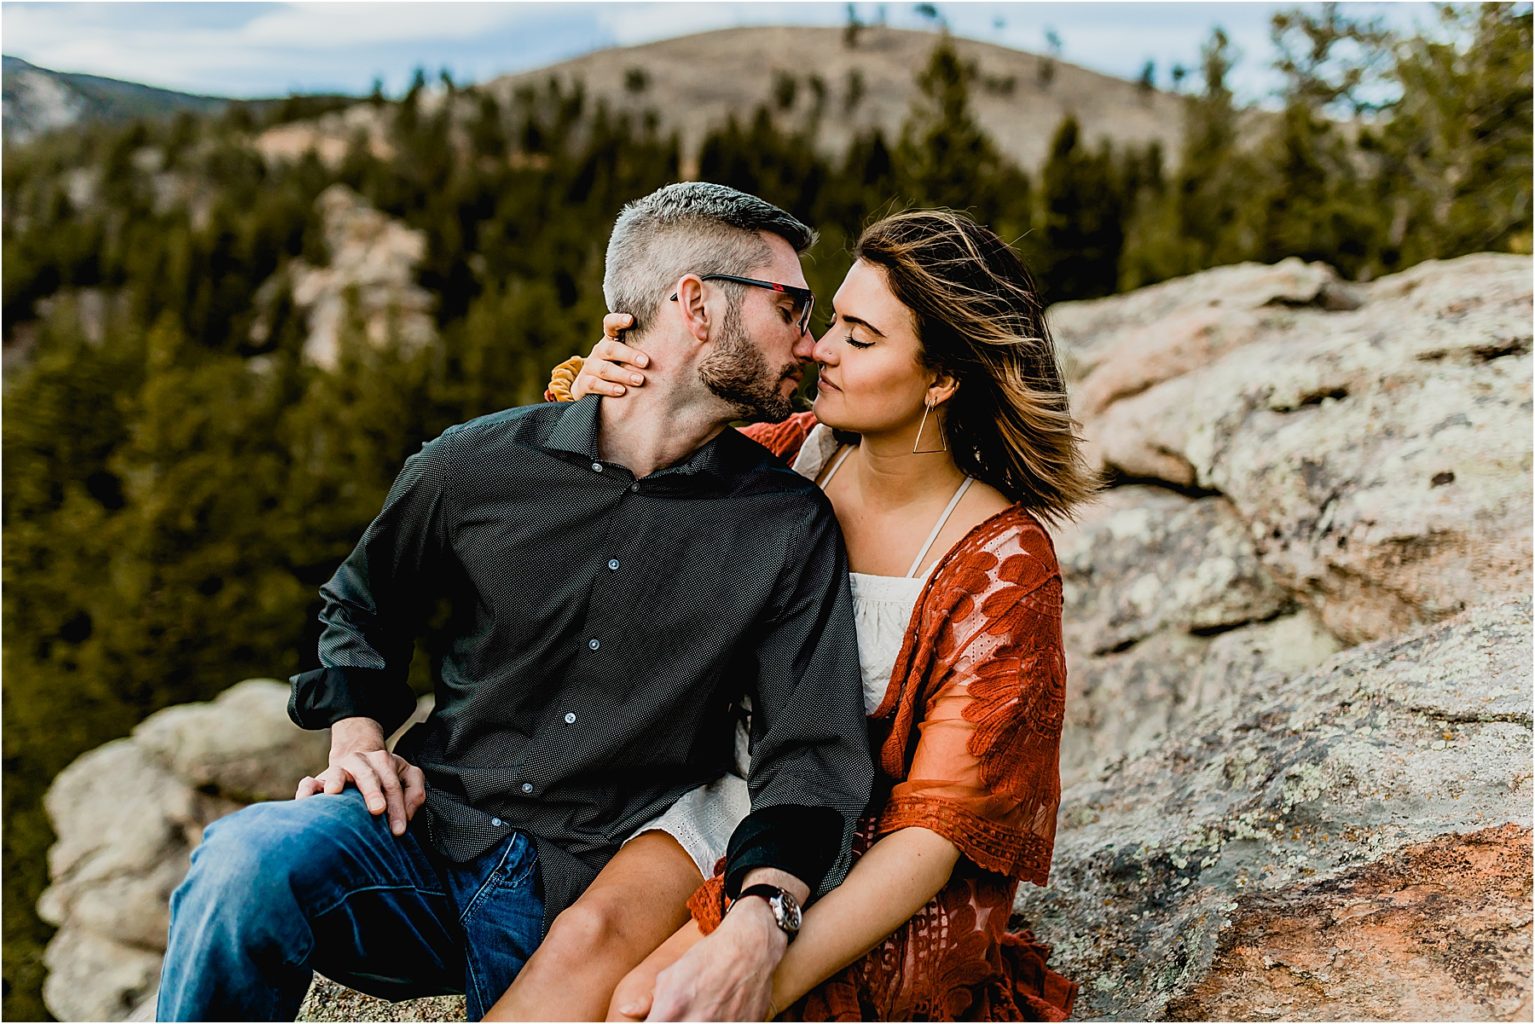 Marissa and Casey's adventure anniversary session in boulder colorado. We saw beautiful mountain and lake views, and adventured on the rocks at a perfect overlook.